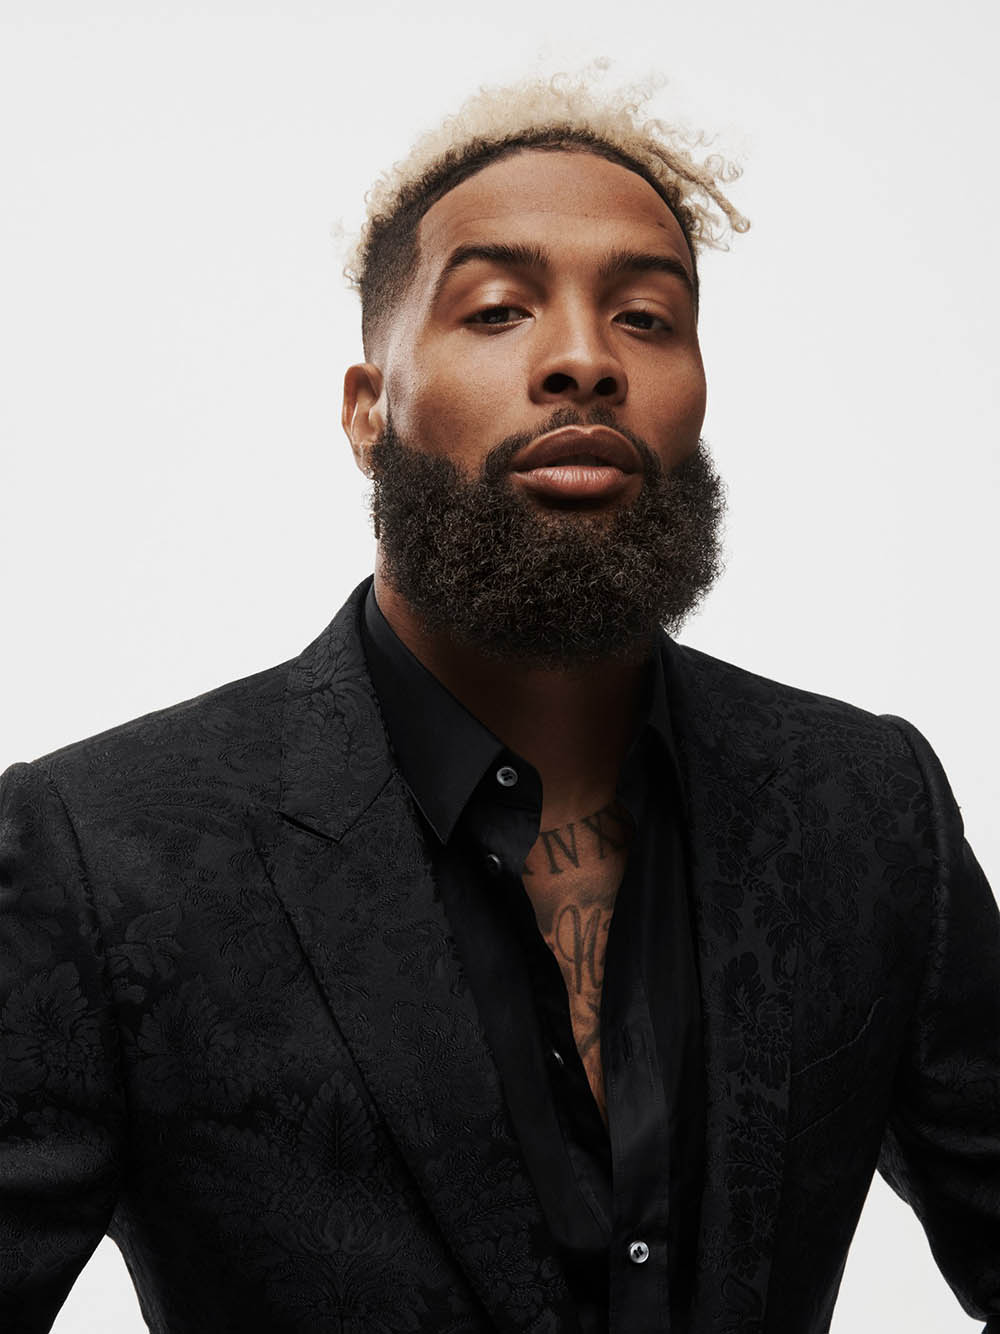 Odell Beckham Jr. covers GQ USA August 2019 by Paola Kudacki